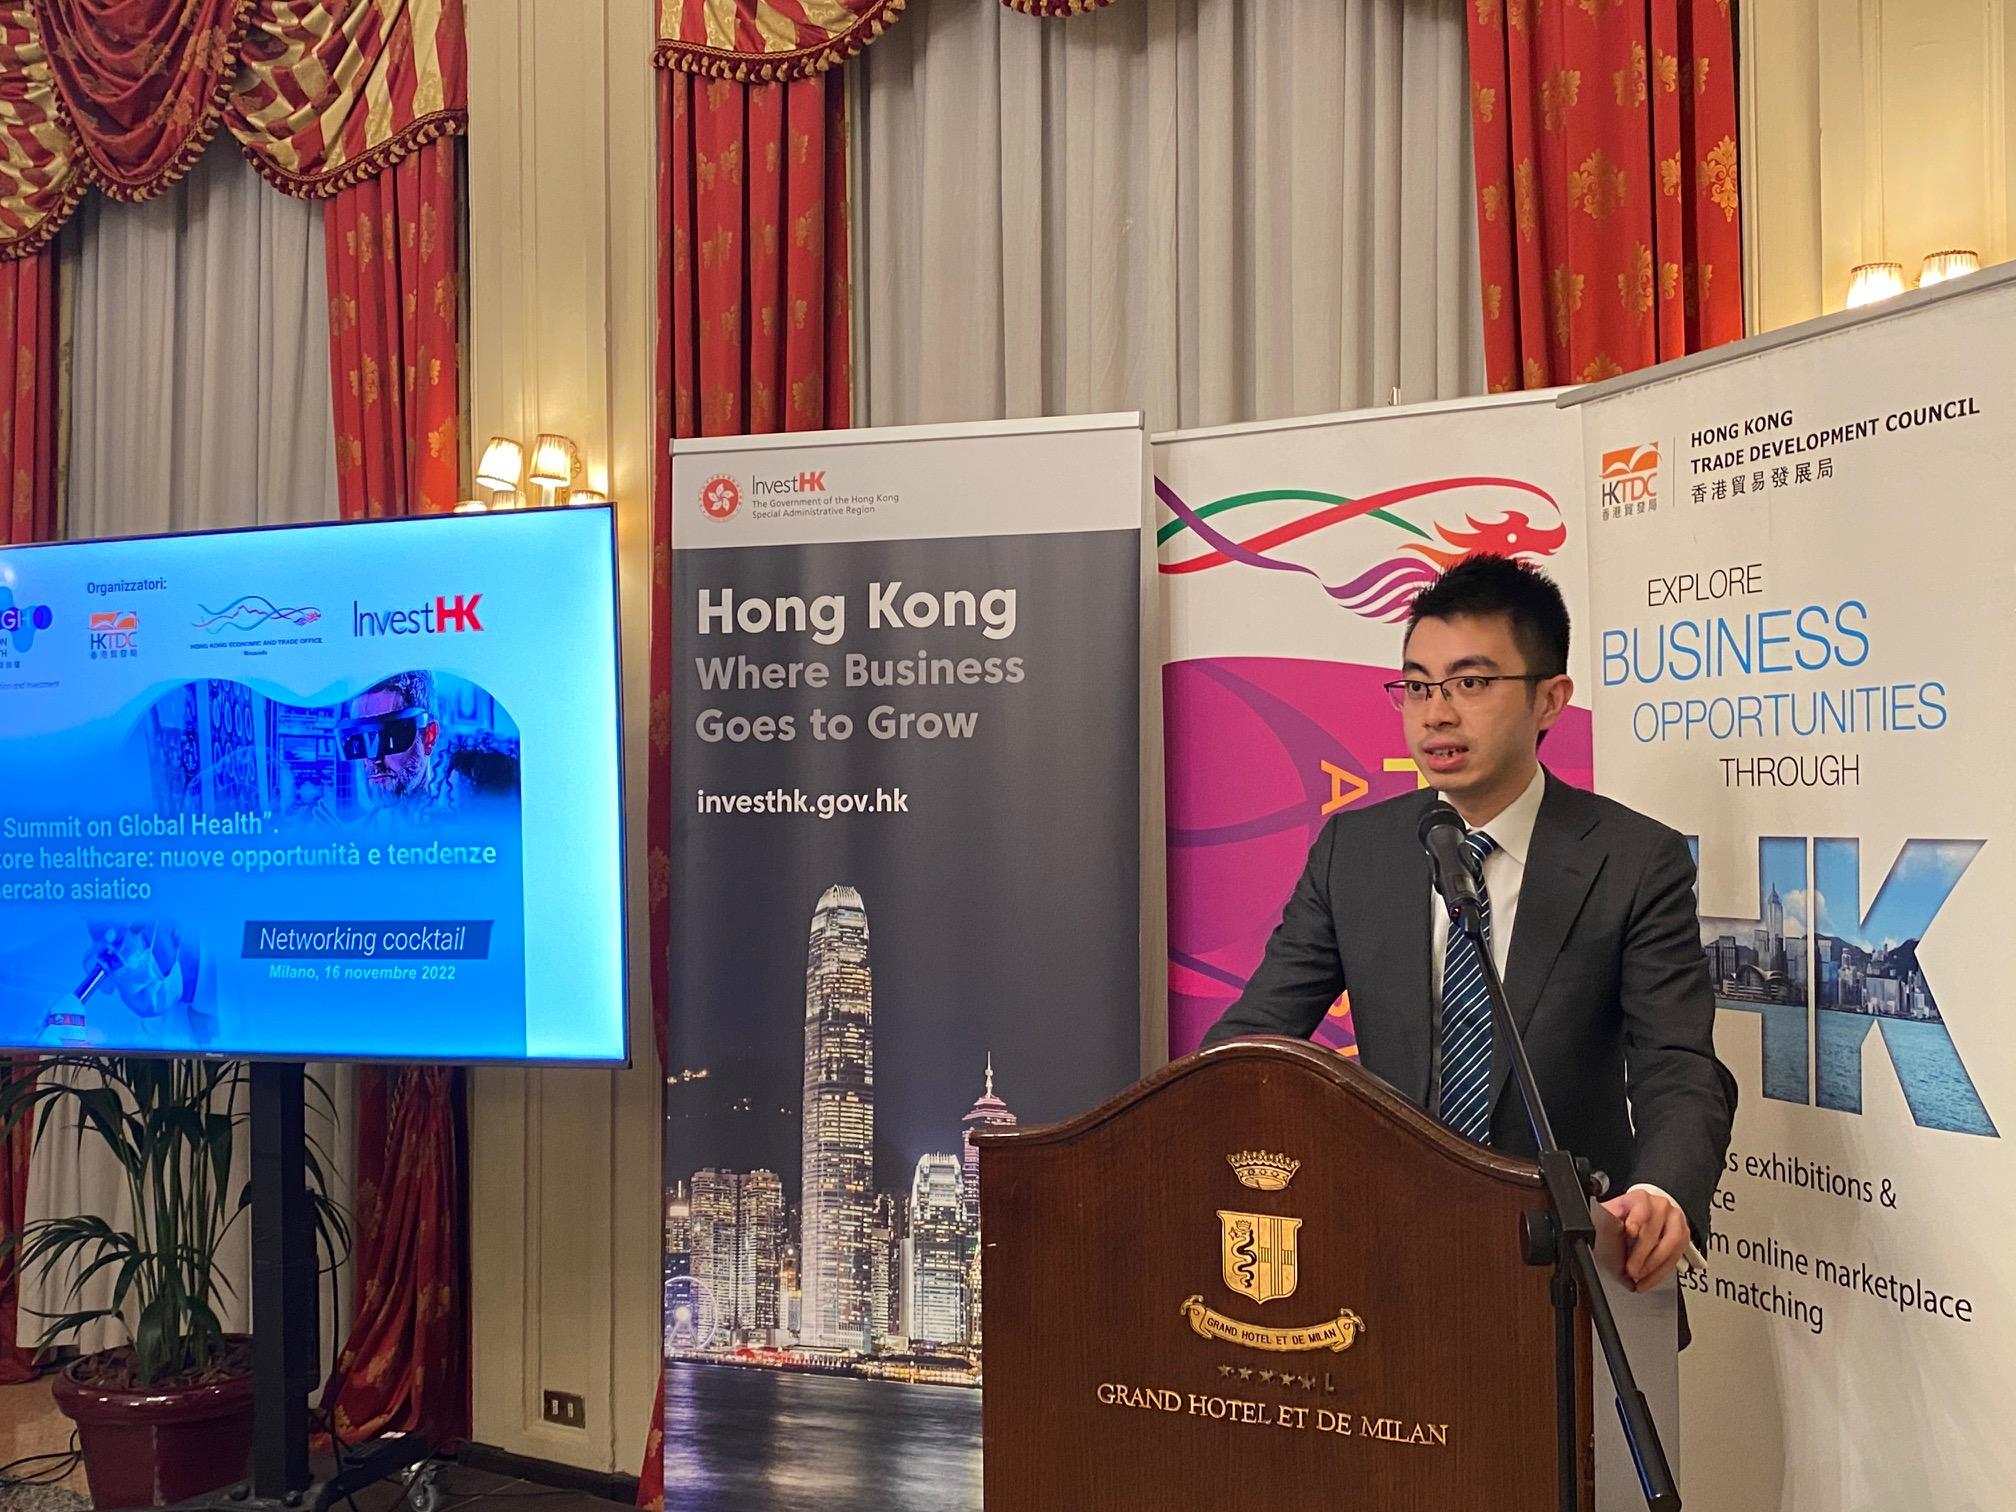 Deputy Representative of the Hong Kong Economic and Trade Office in Brussels, Mr Henry Tsoi, underlined the business opportunities in the Hong Kong health and medical sector in his speech to Italian entrepreneurs at a business seminar in Milan, Italy on November 16 (Milan time).